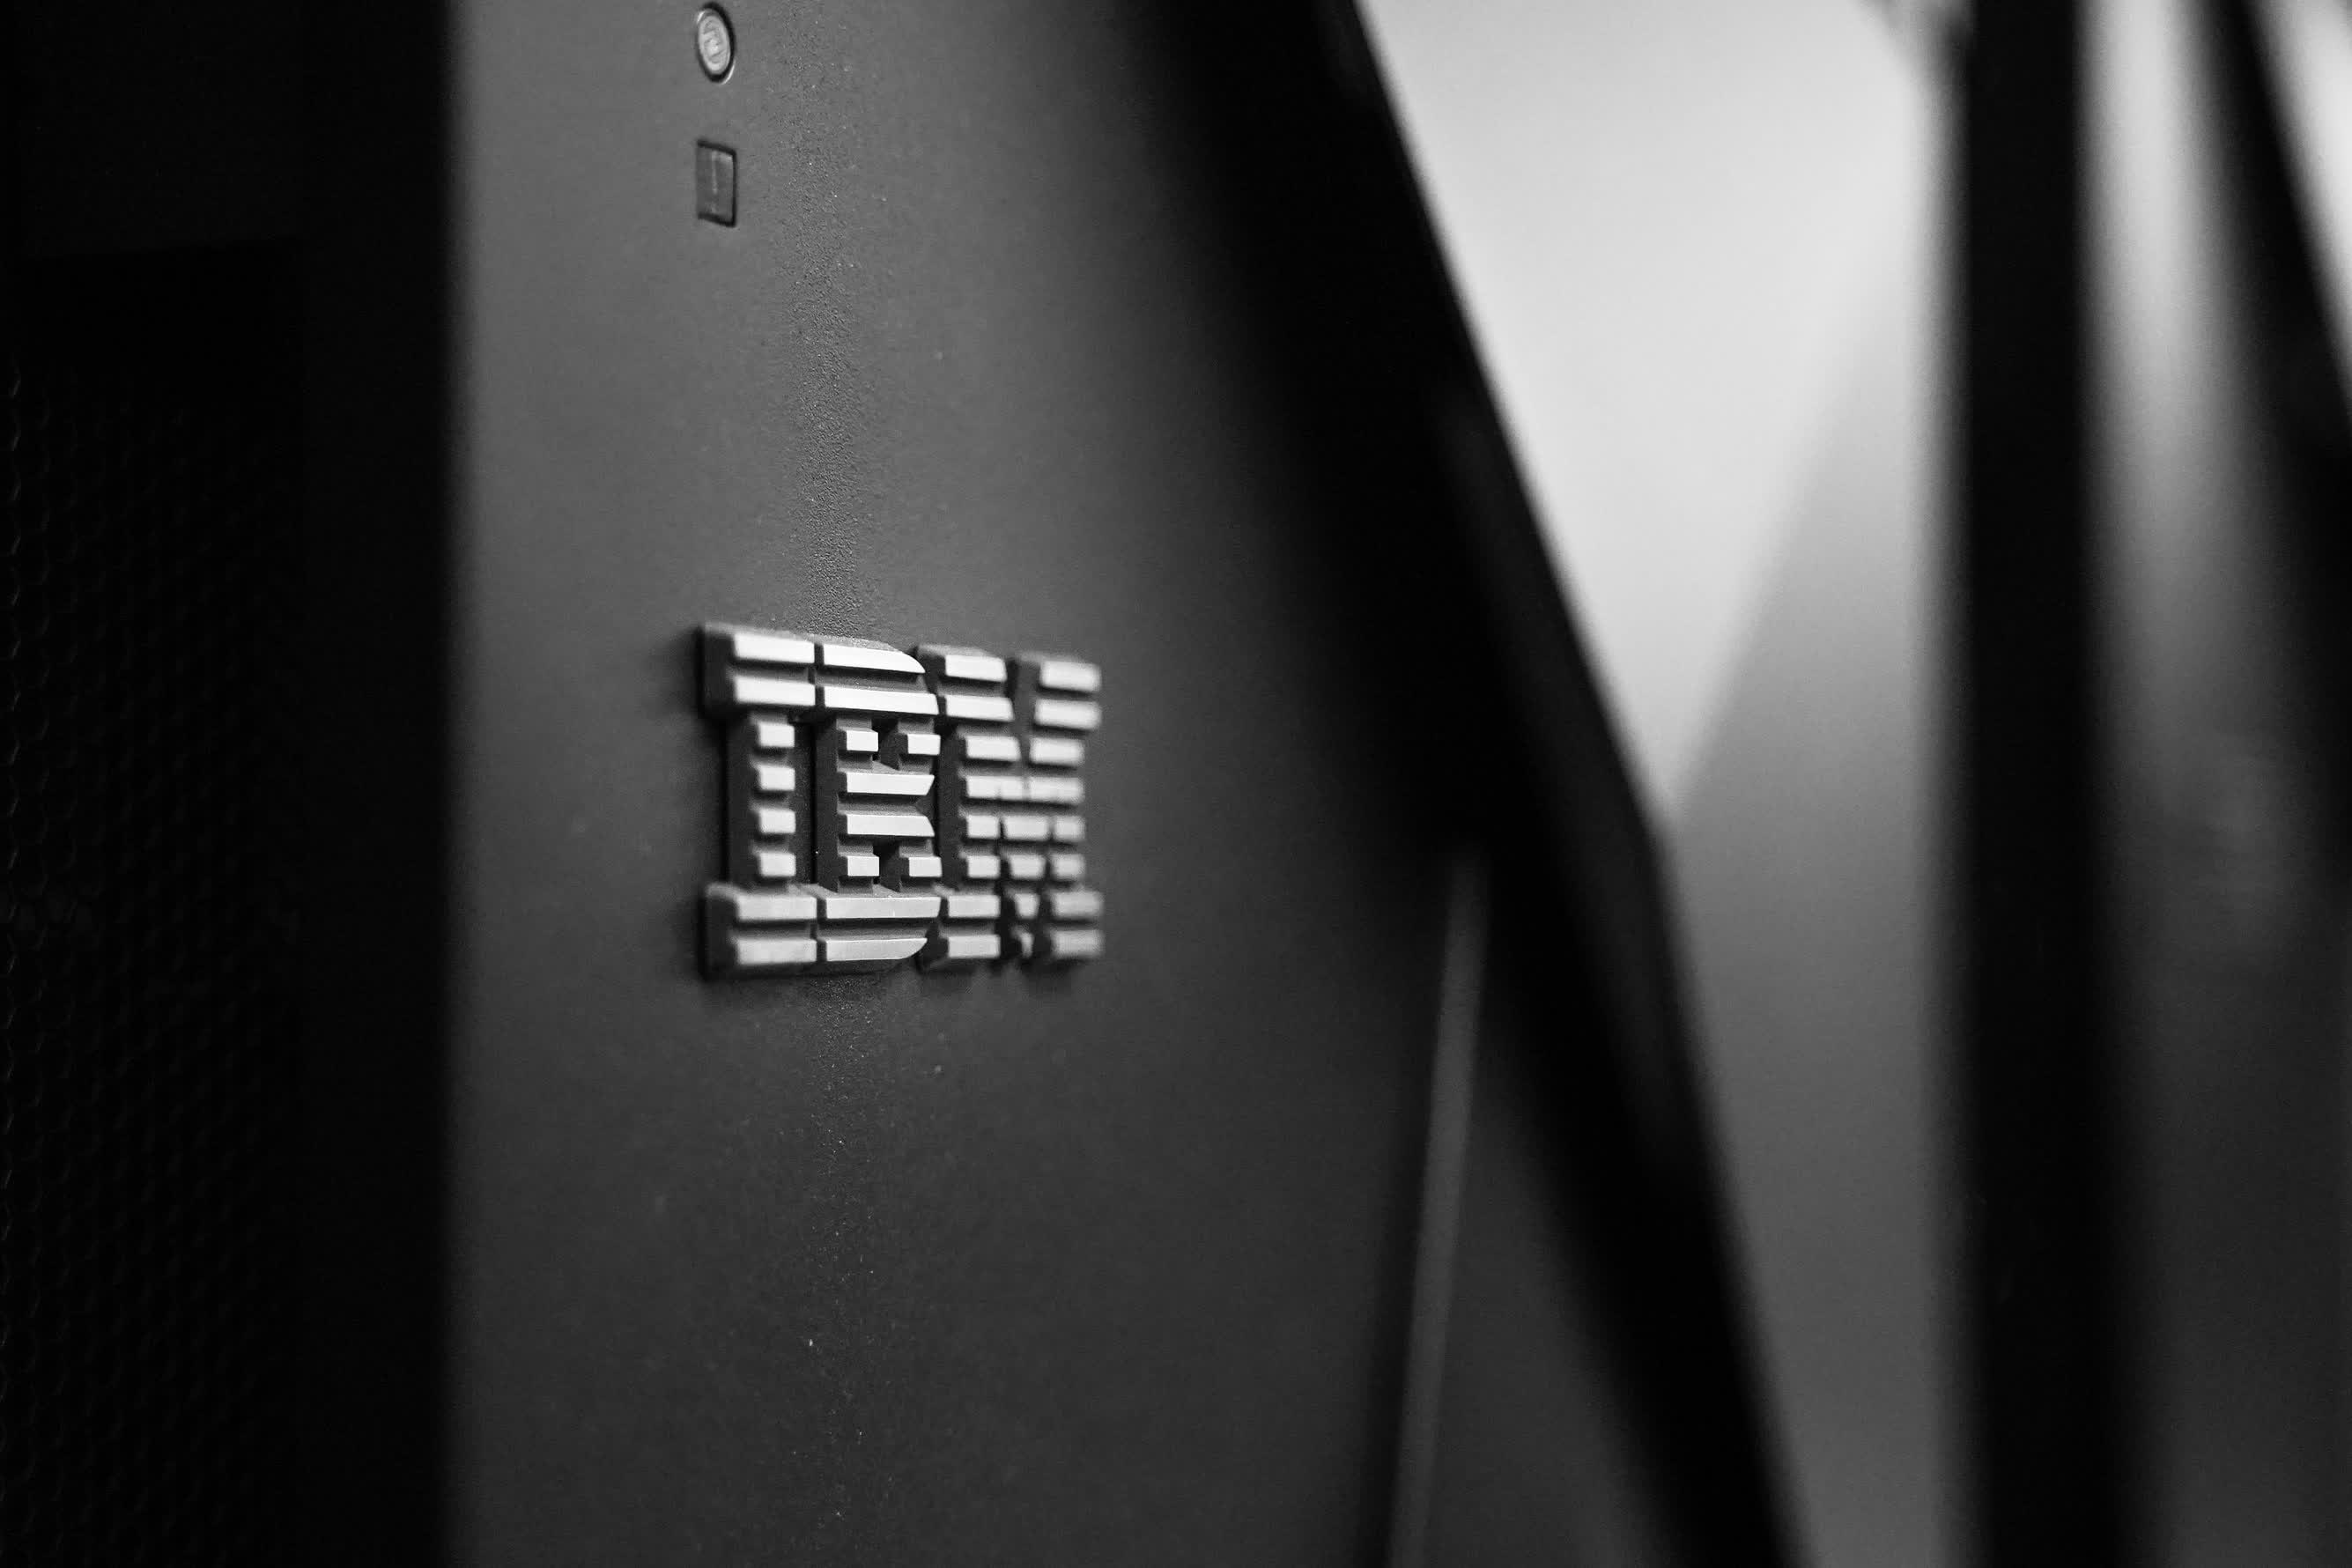 IBM's new Eagle quantum processor is a 127-qubit chip unmatched by standard computers